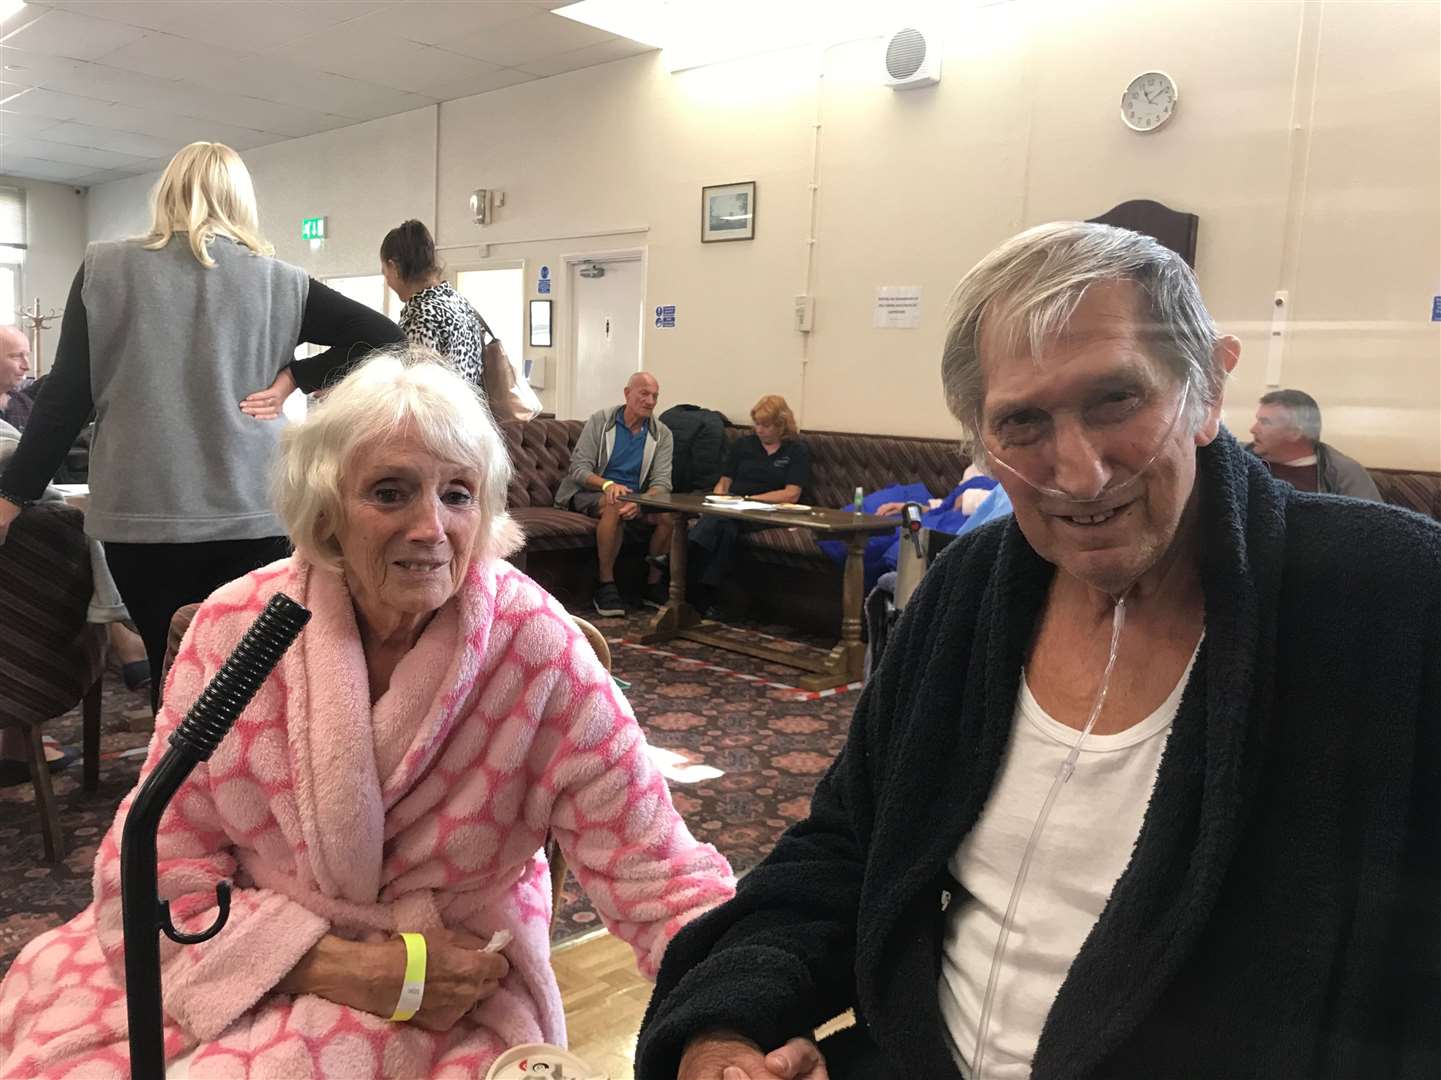 Brian and Georgina Hardy were among those who had to leave their home at Hoo Marina Park following the fire at the neighbouring industrial estate